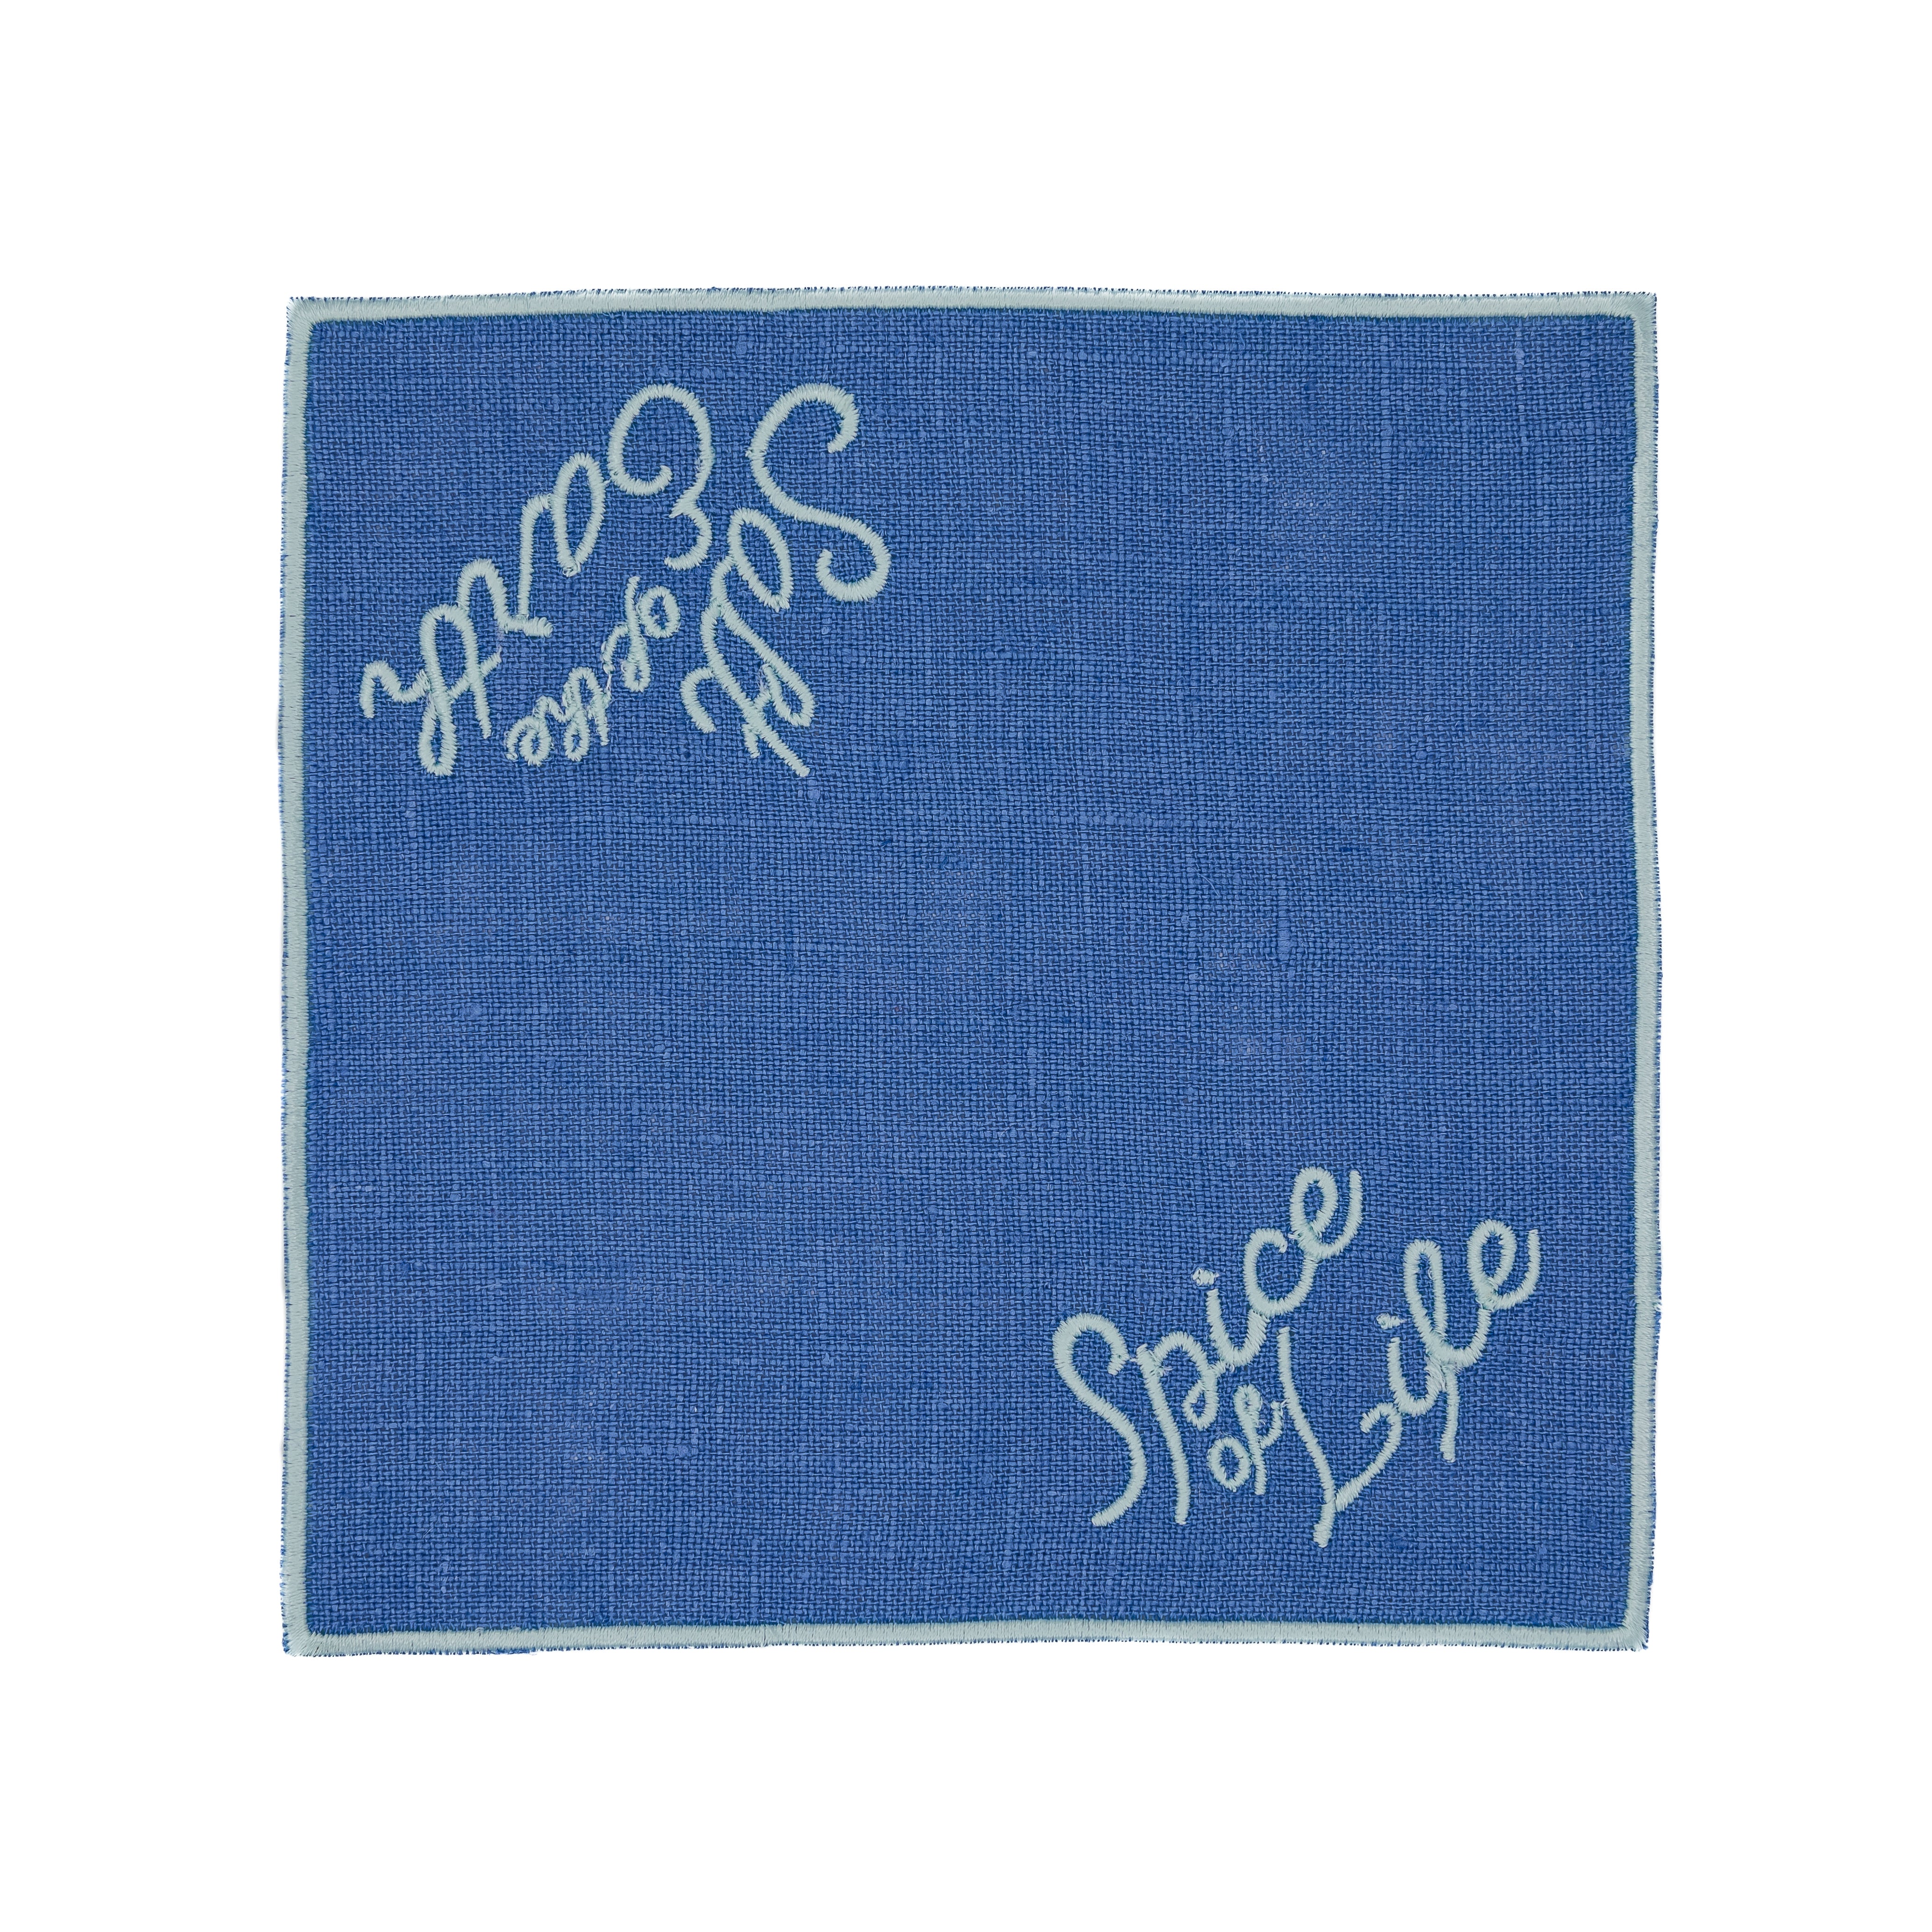 Opposites Attract Cocktail Napkins (Set of 6)